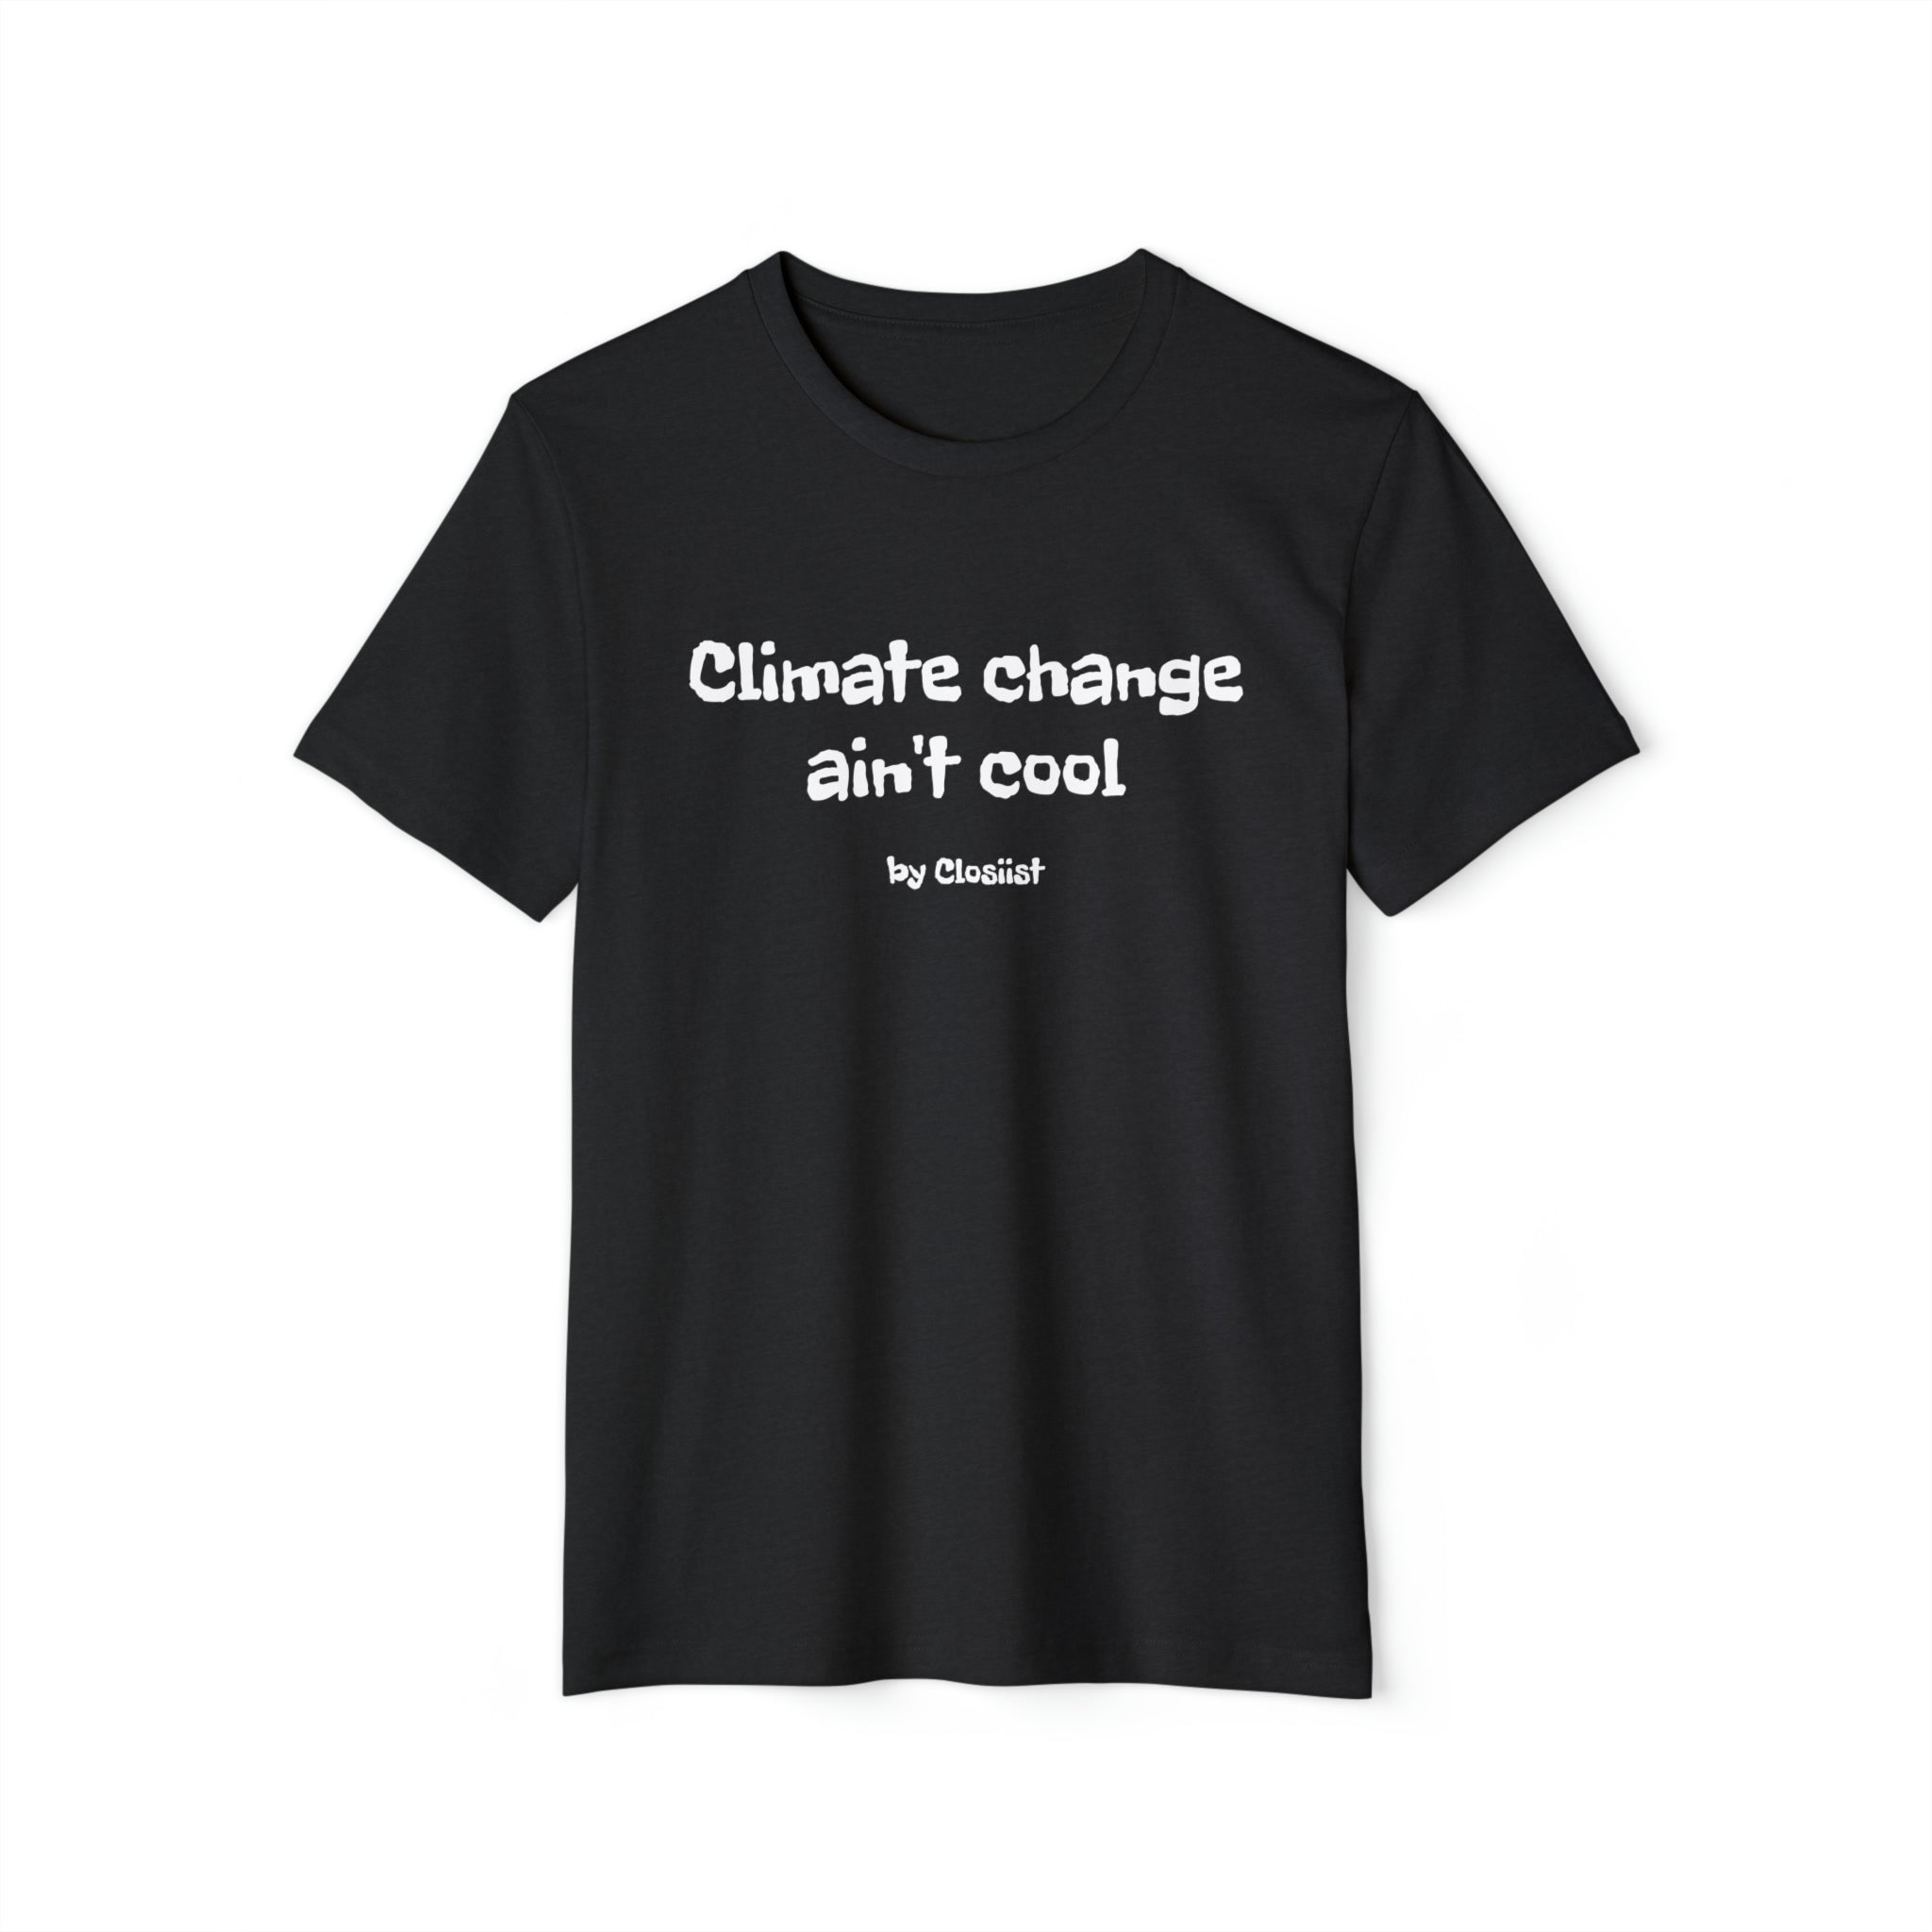 Make a bold statement & fight climate change with our stylish 